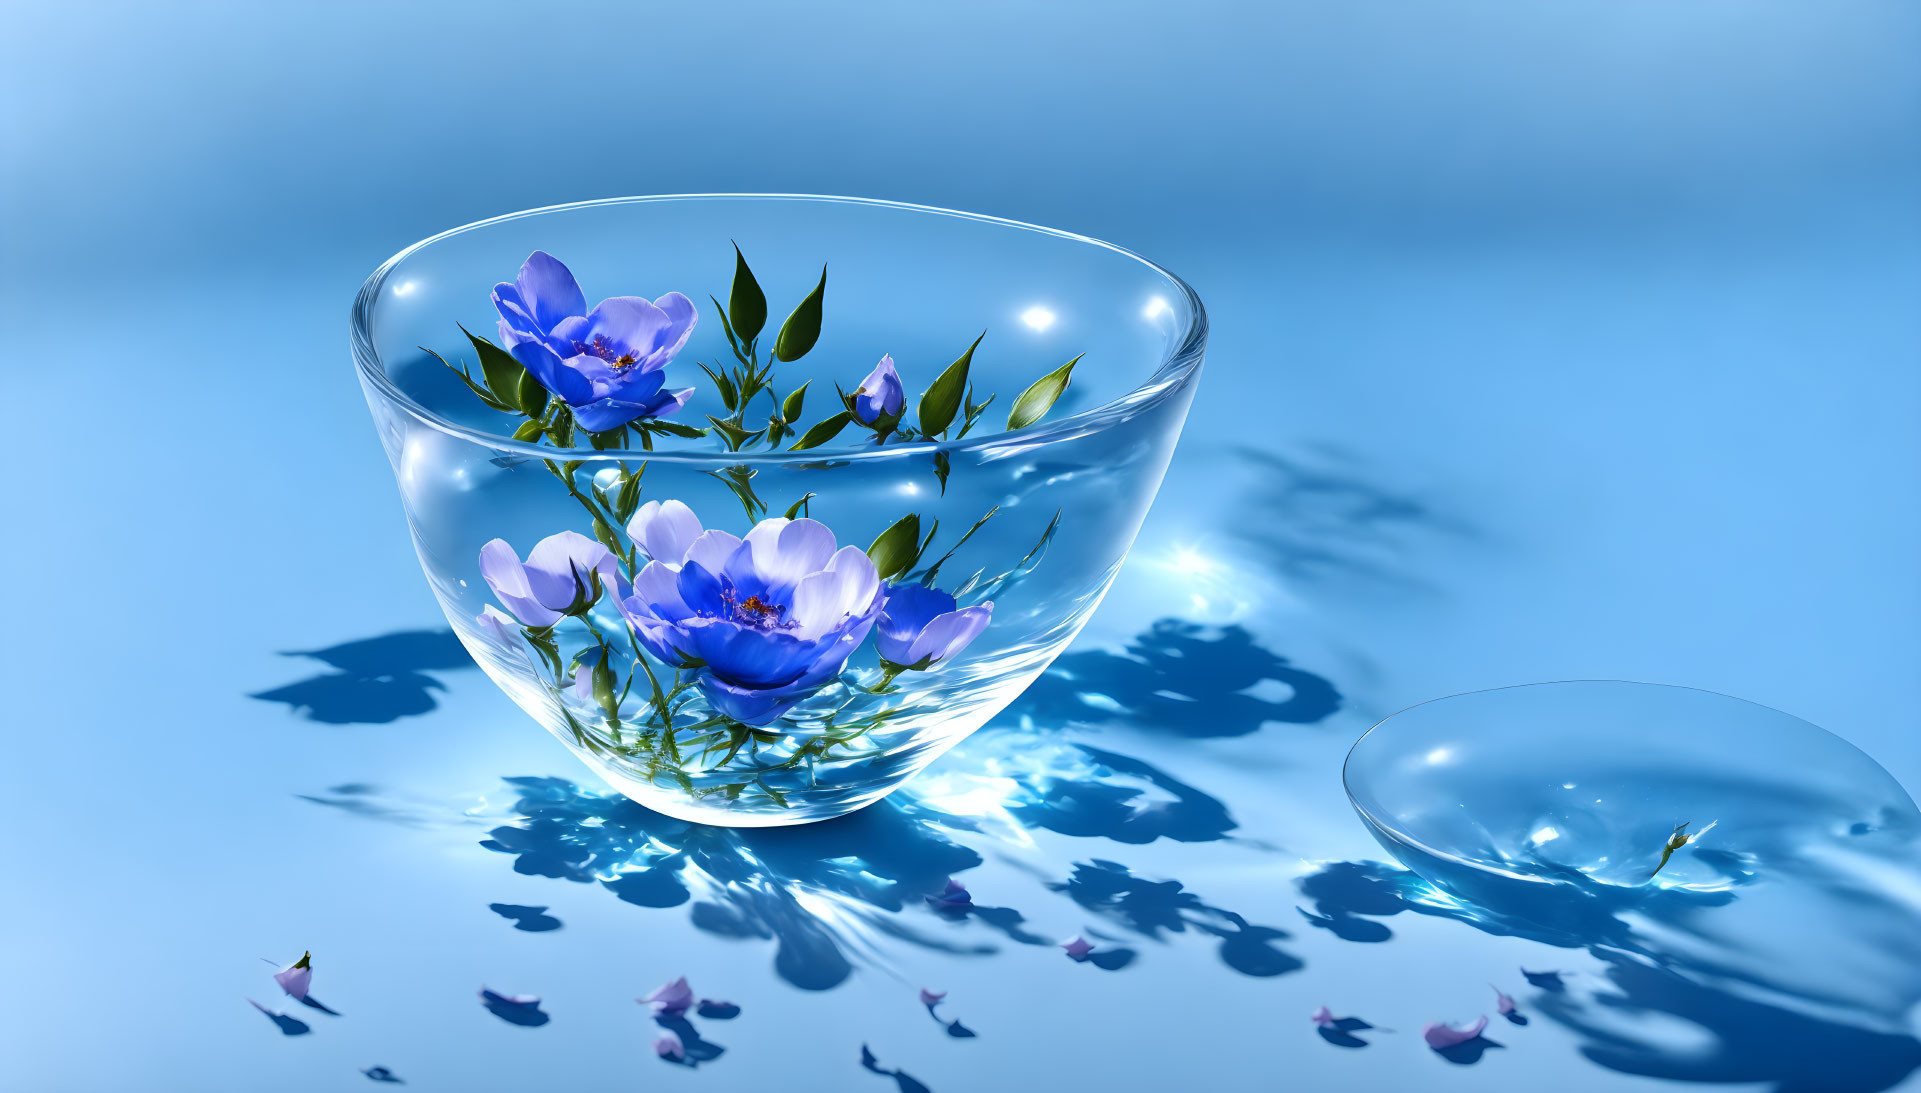 Blue Floral Reflections in Water